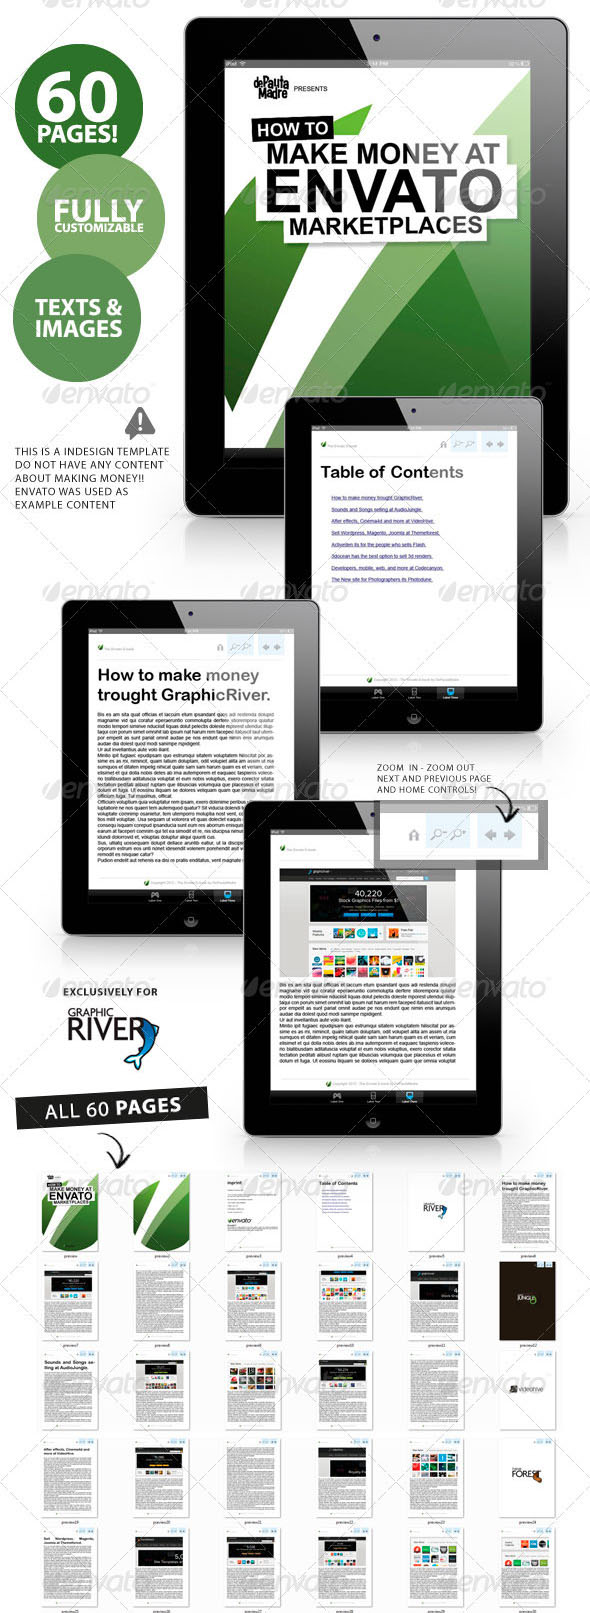 60 Pages eBook/Magazine/Book InDesign Template